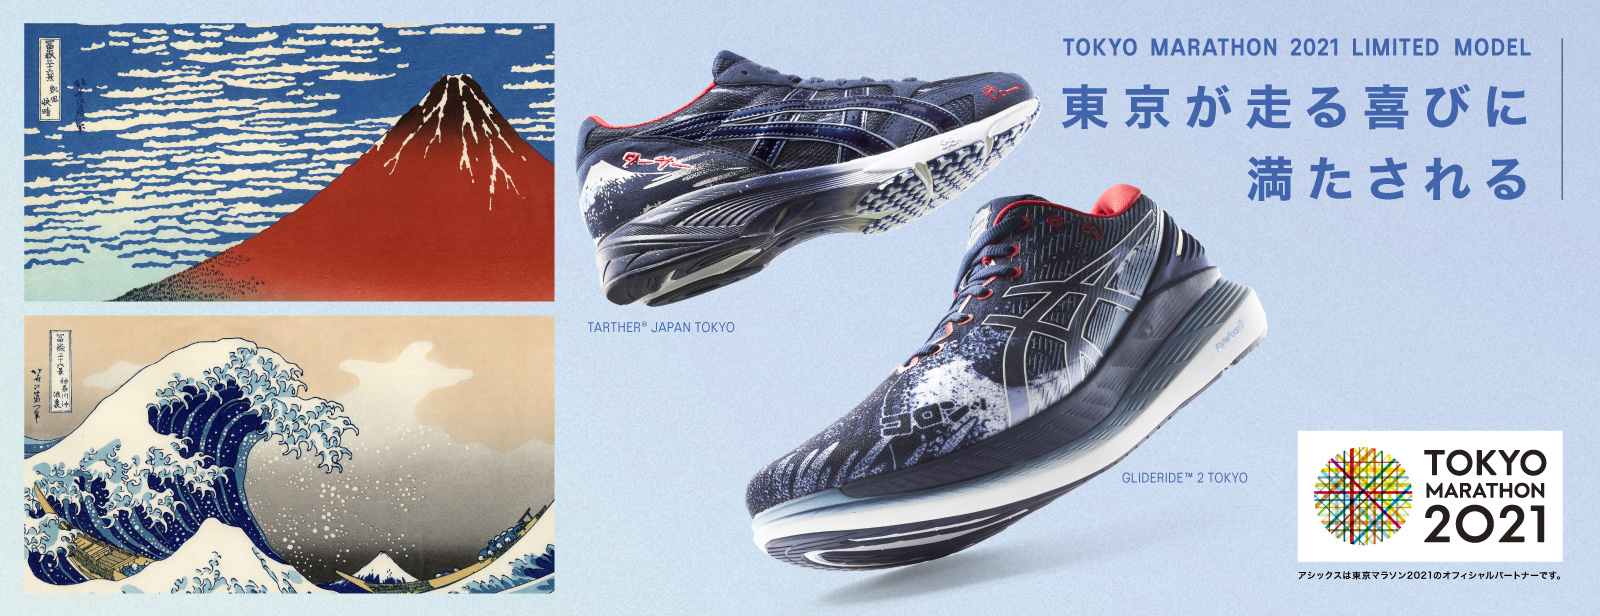 Tear up the stage and the 2020 Tokyo Marathon with kabukiinspired